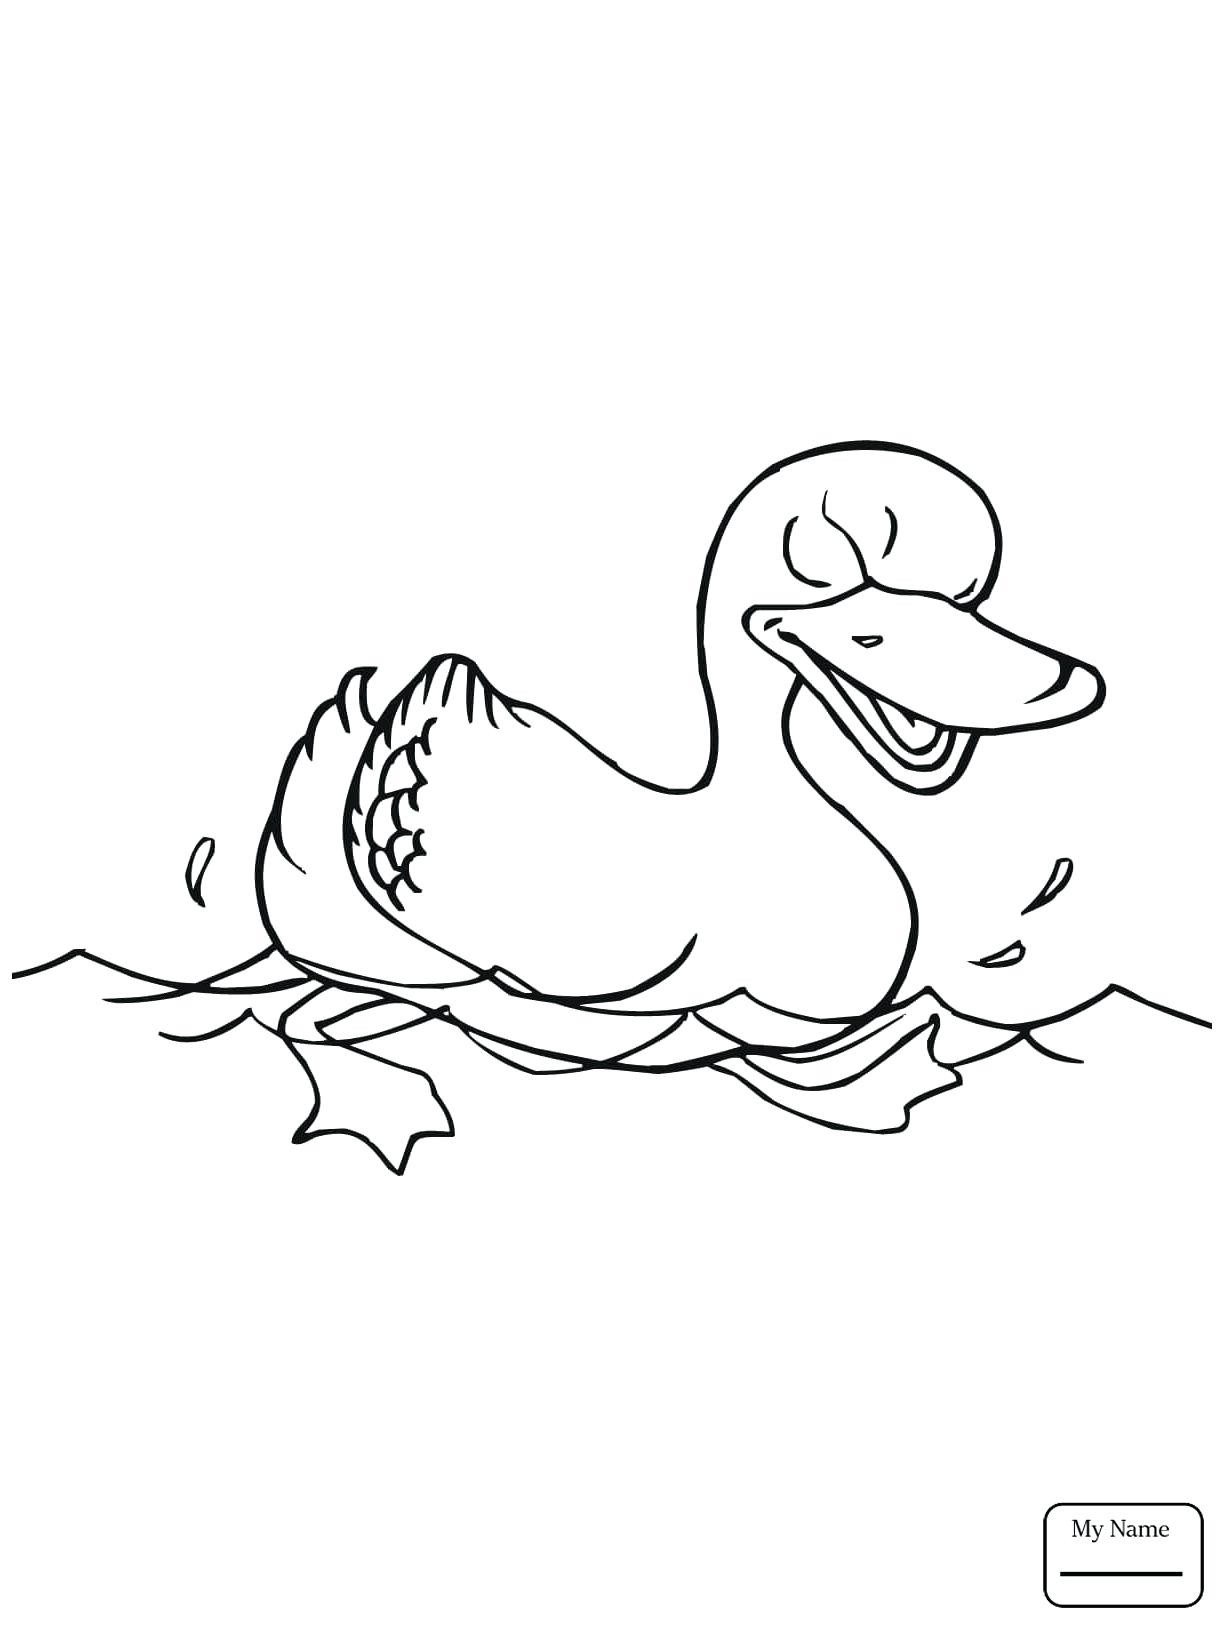 Noted Pond Animals Coloring Pages Duck In A Drawing At GetDrawings Free For Personal Use